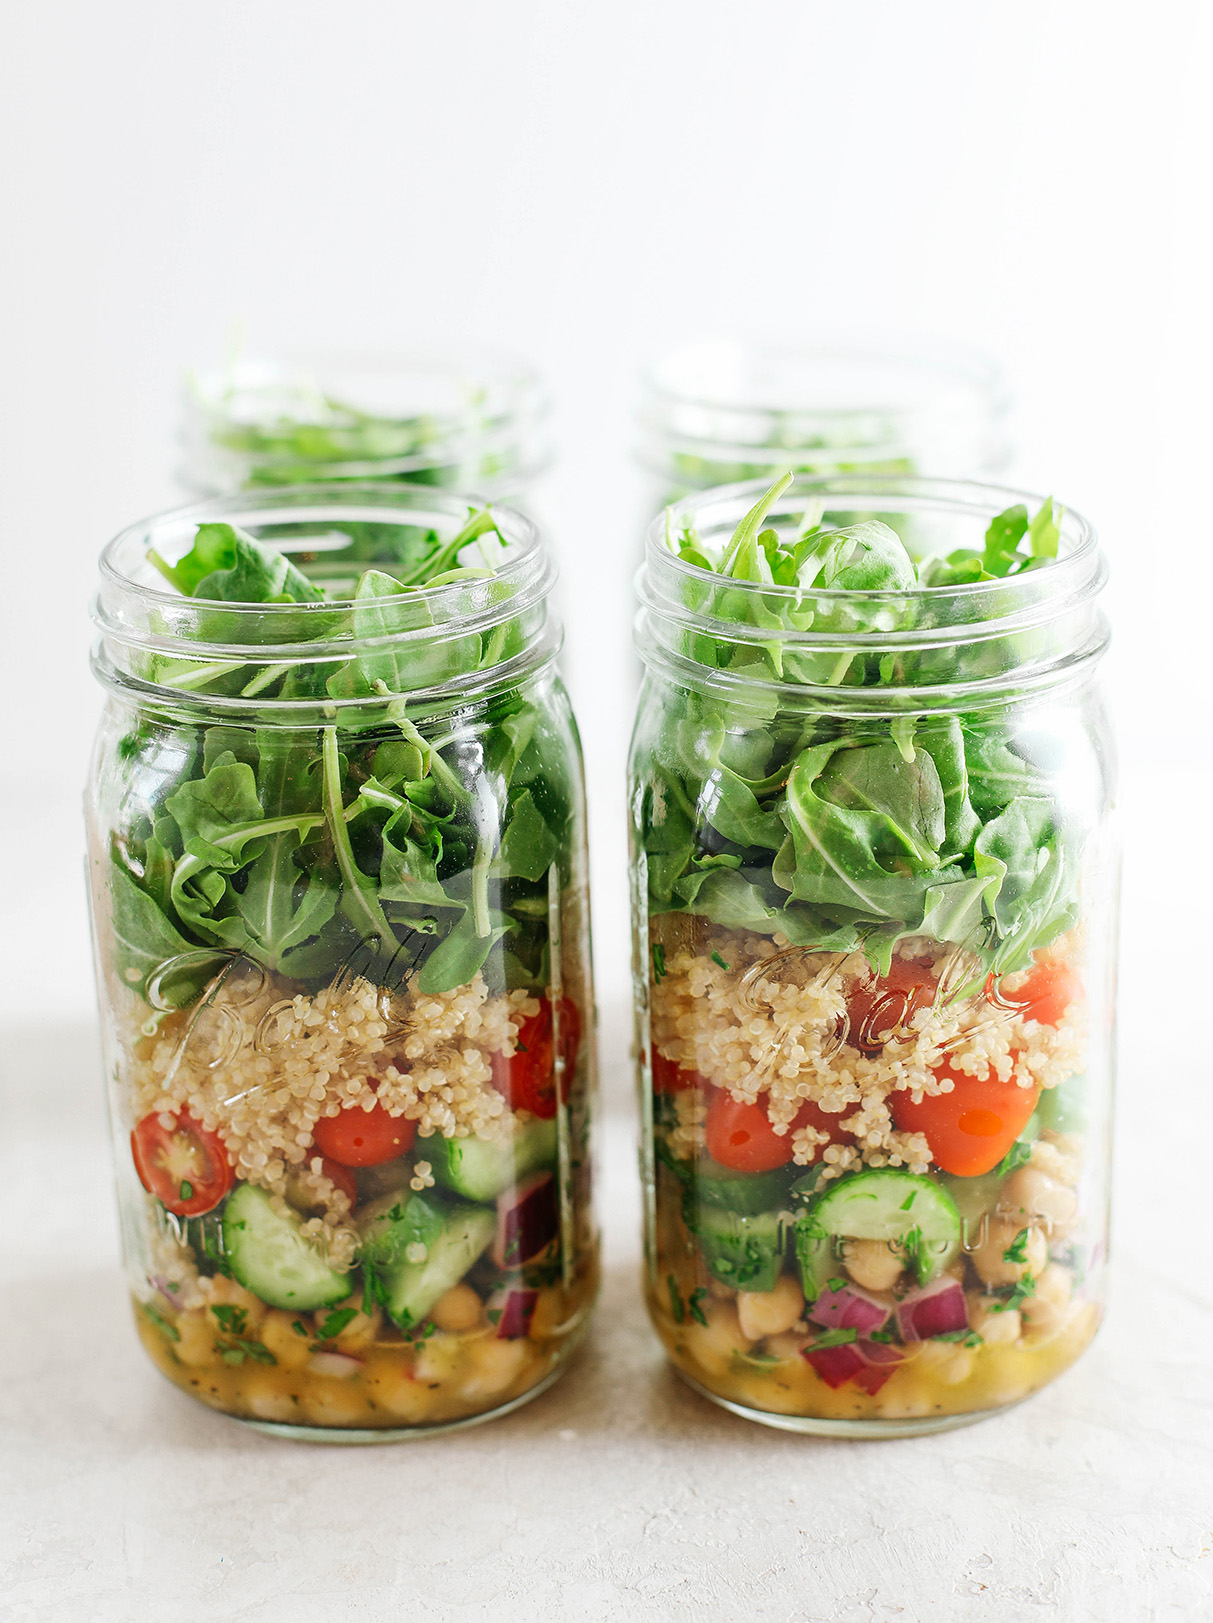 These protein-packed Mediterranean Mason Jar Salads are layered with fresh veggies, quinoa, and chickpeas with the most delicious lemon garlic dressing!  Perfect for meal prep and super easy to assemble! 